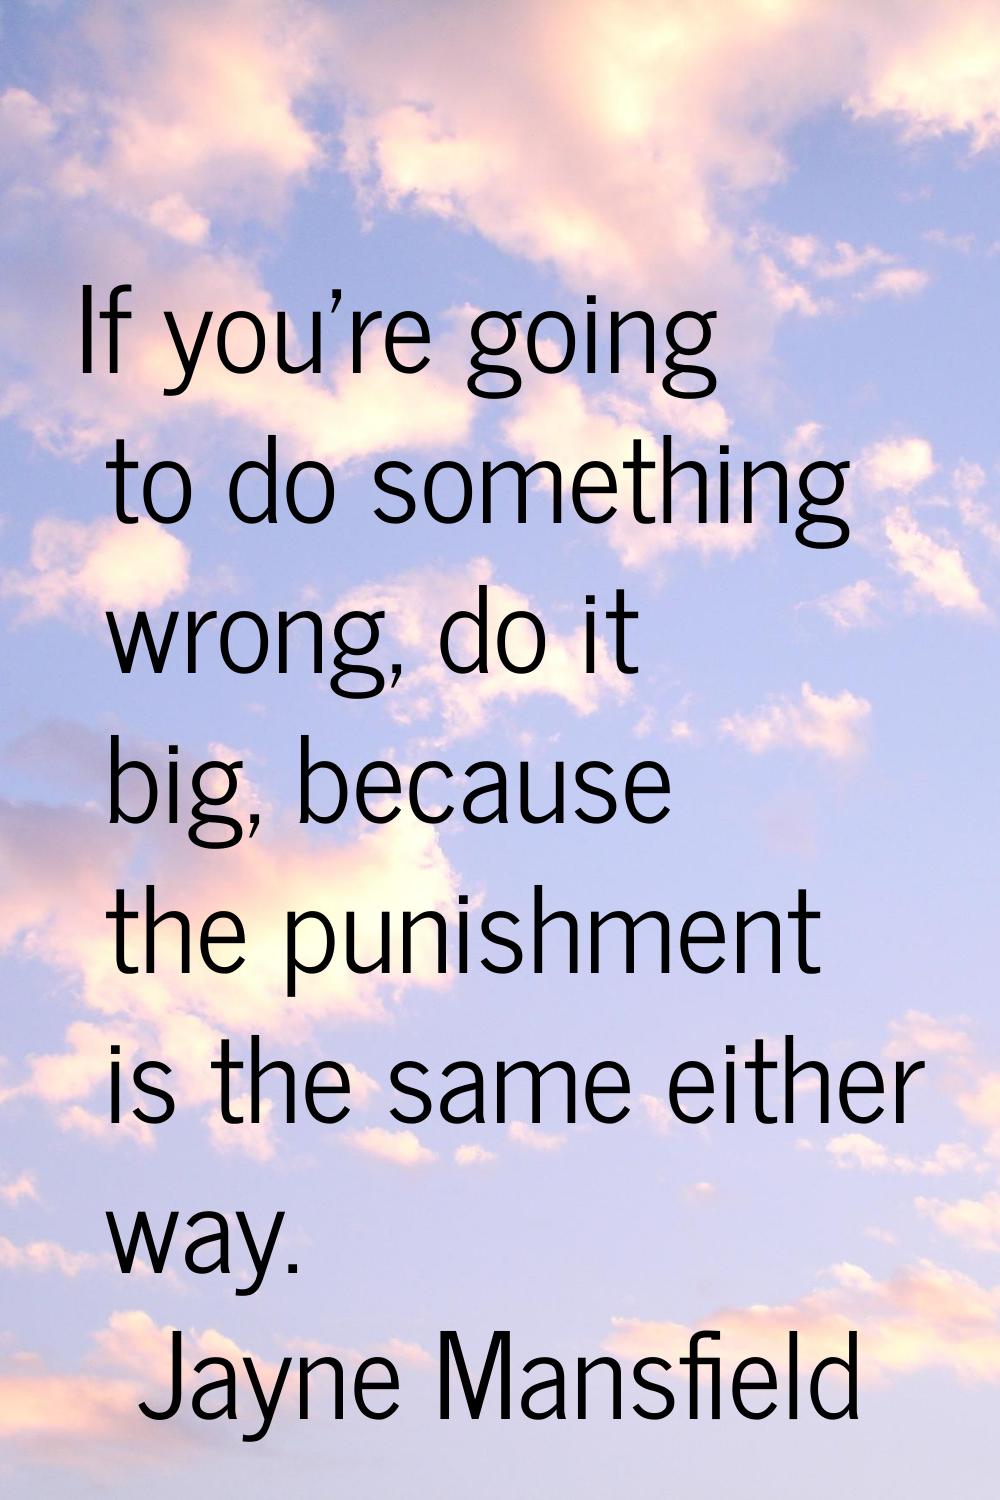 If you're going to do something wrong, do it big, because the punishment is the same either way.